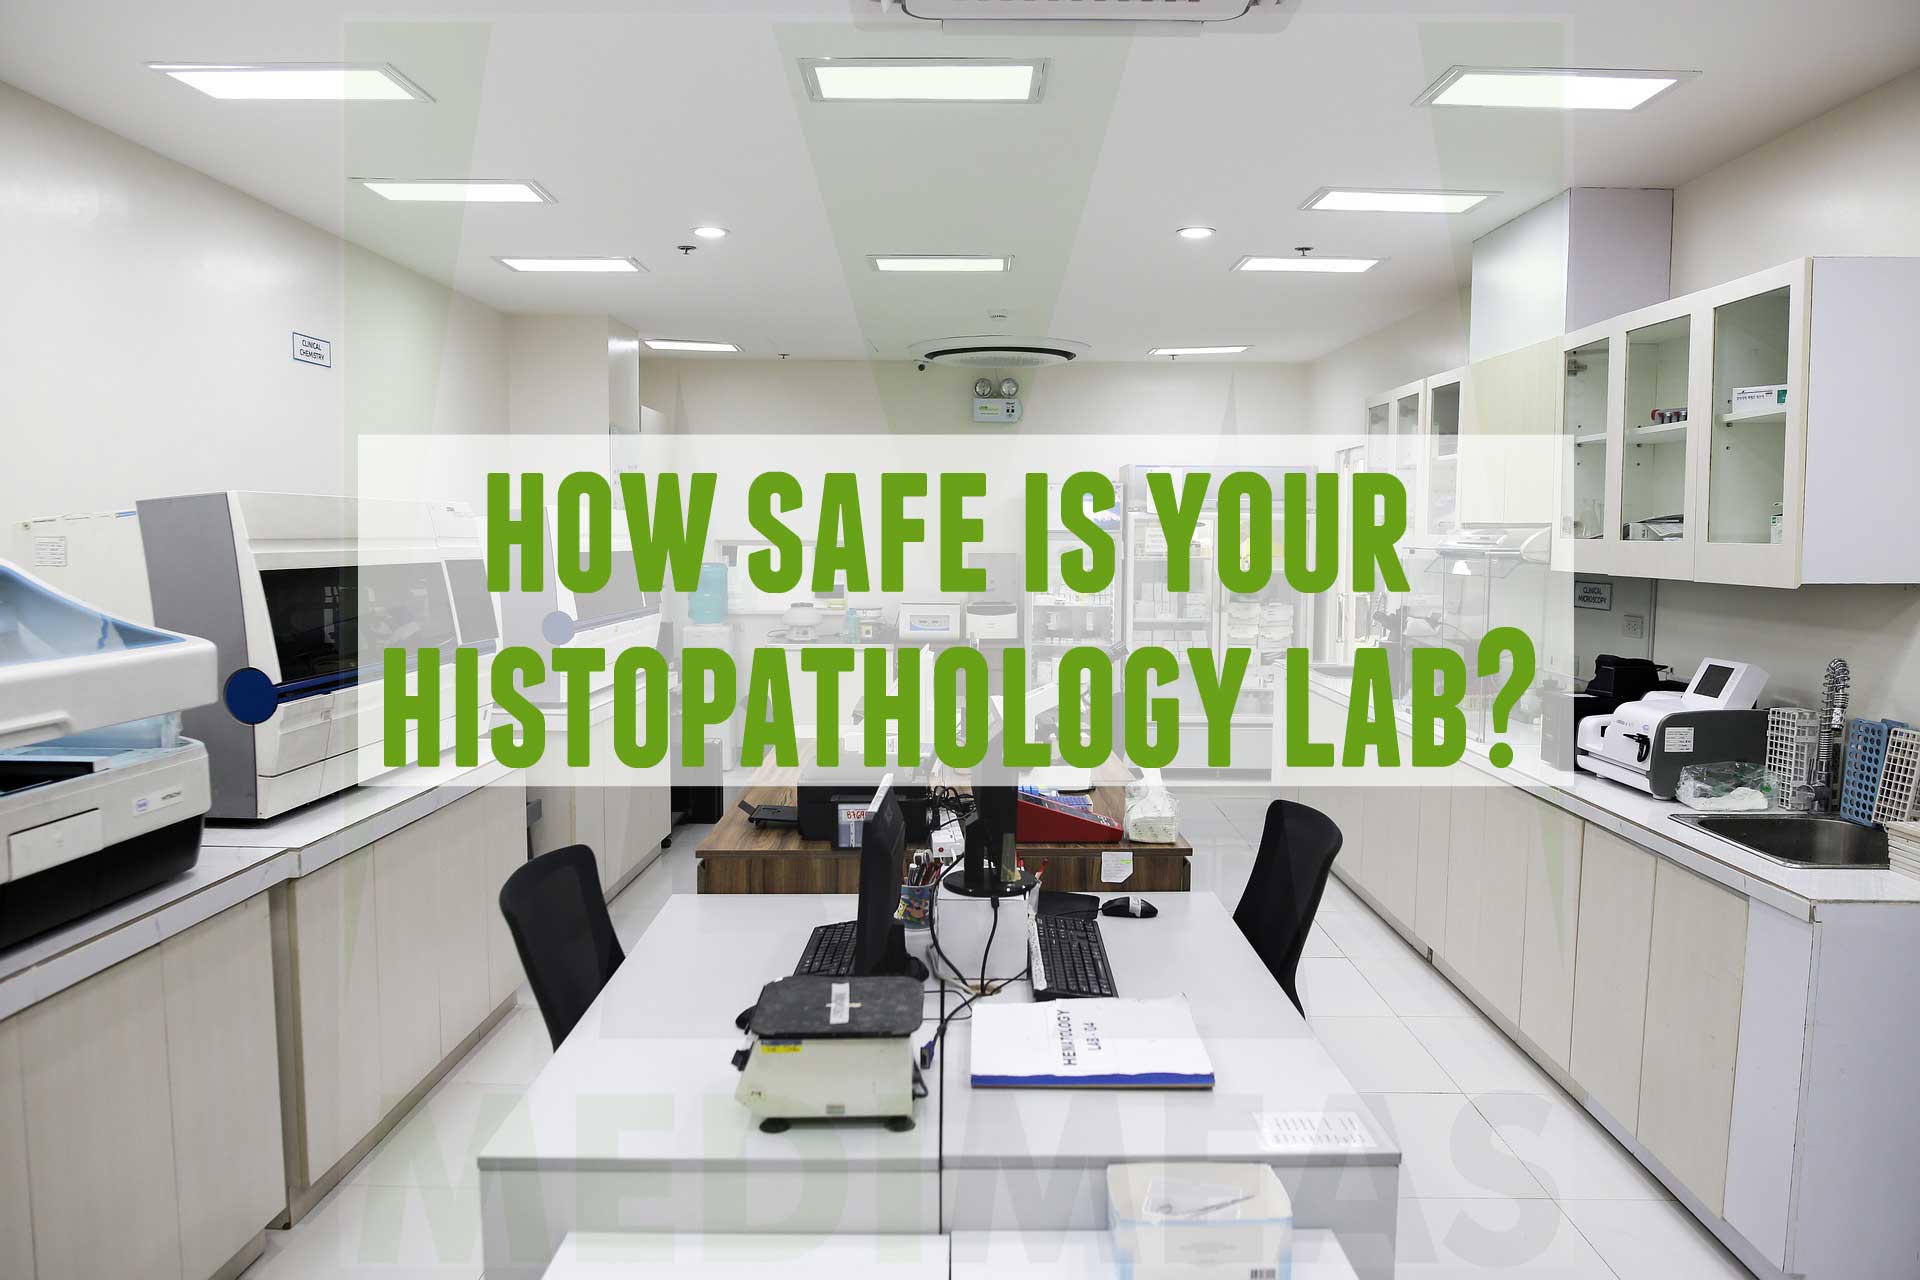 How safe is your Histopathology Lab?